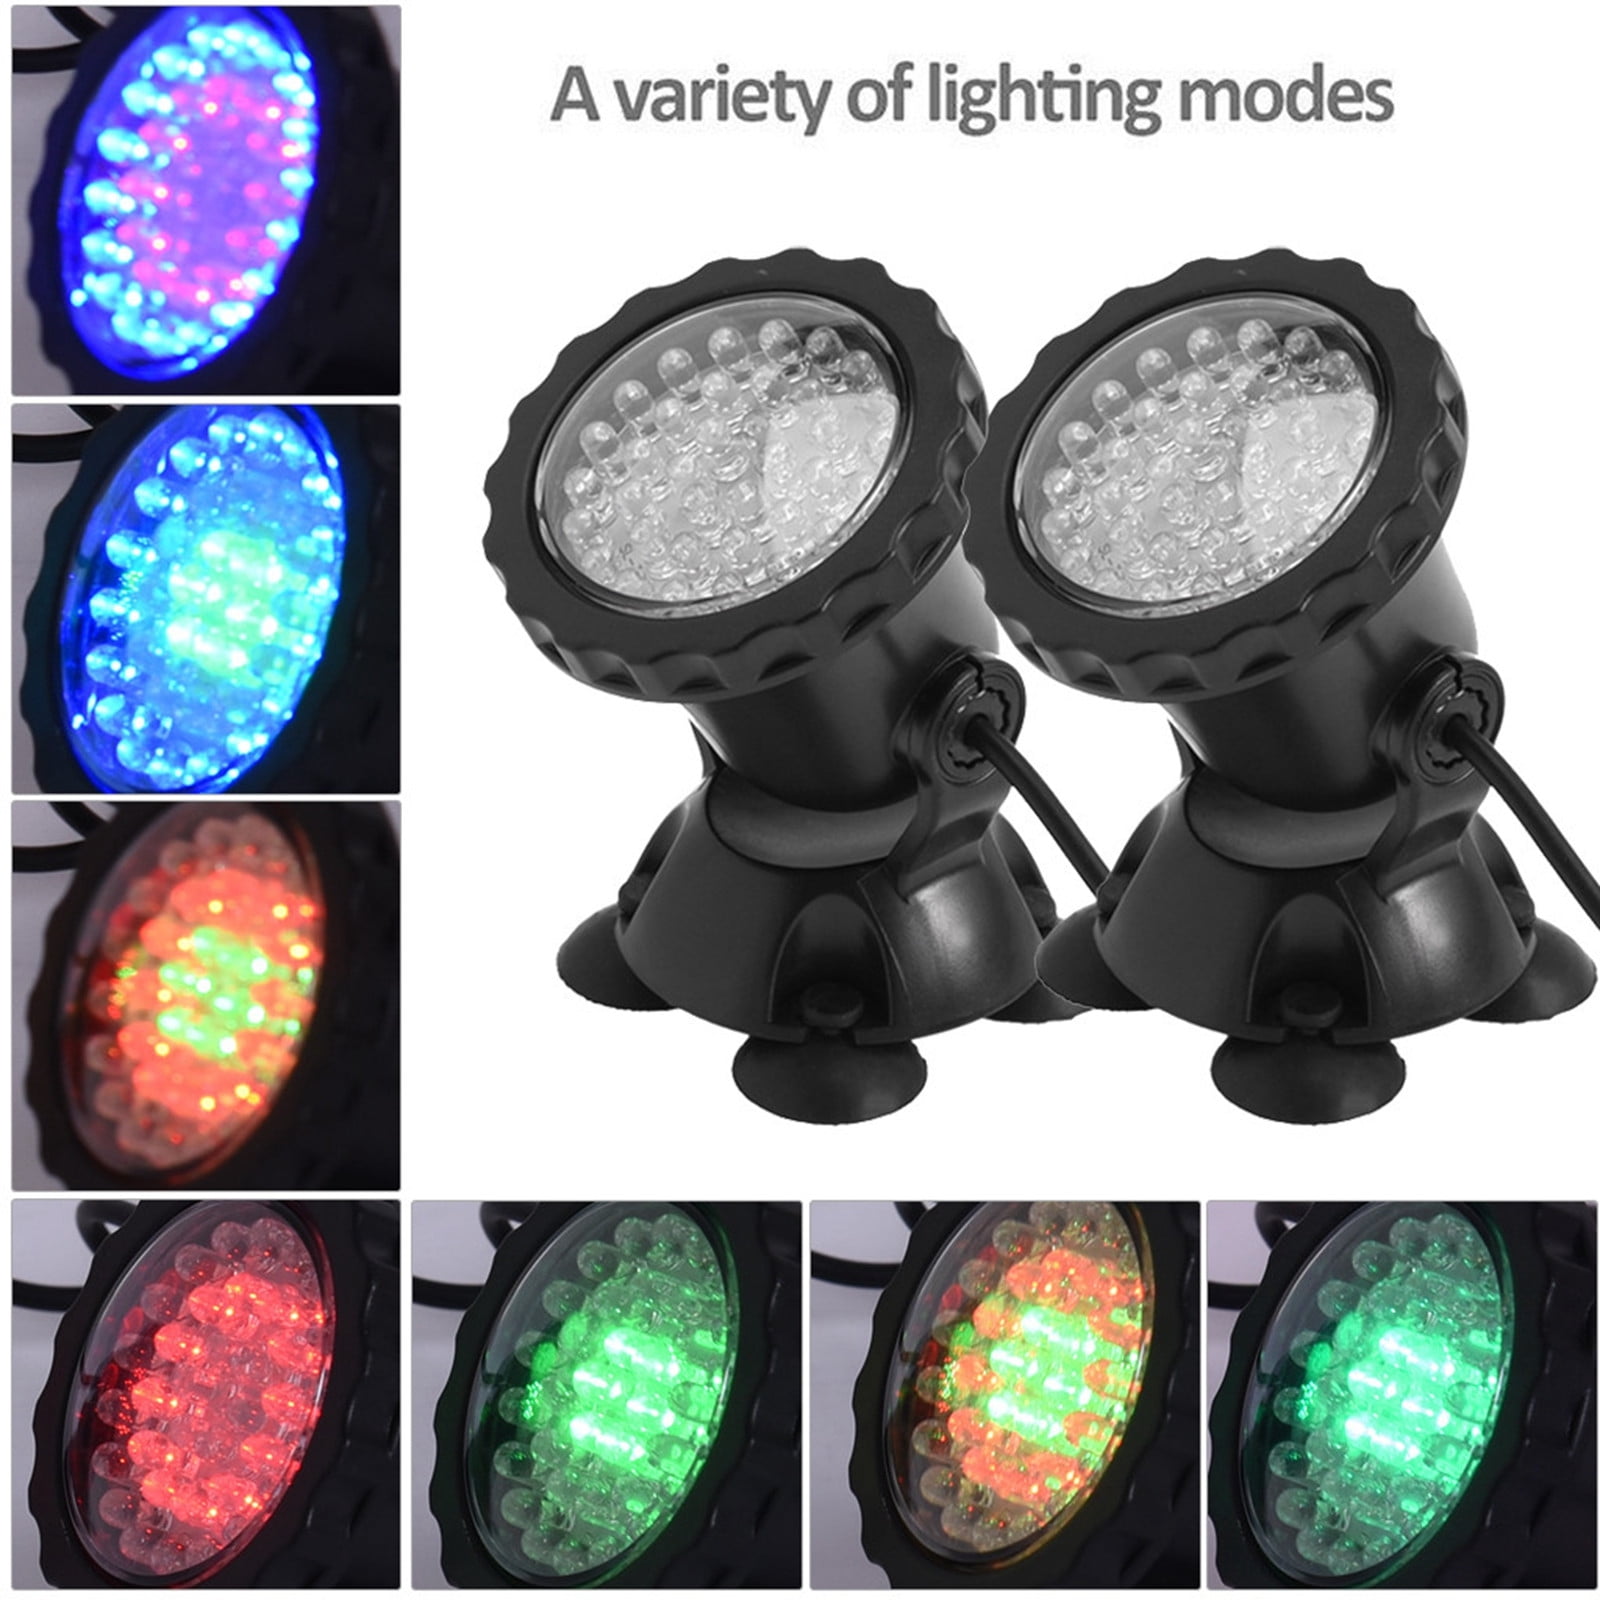 2X IR Remote Submersible 36 LED RGB Pond Spot Lights Underwater Pool Fountain US 